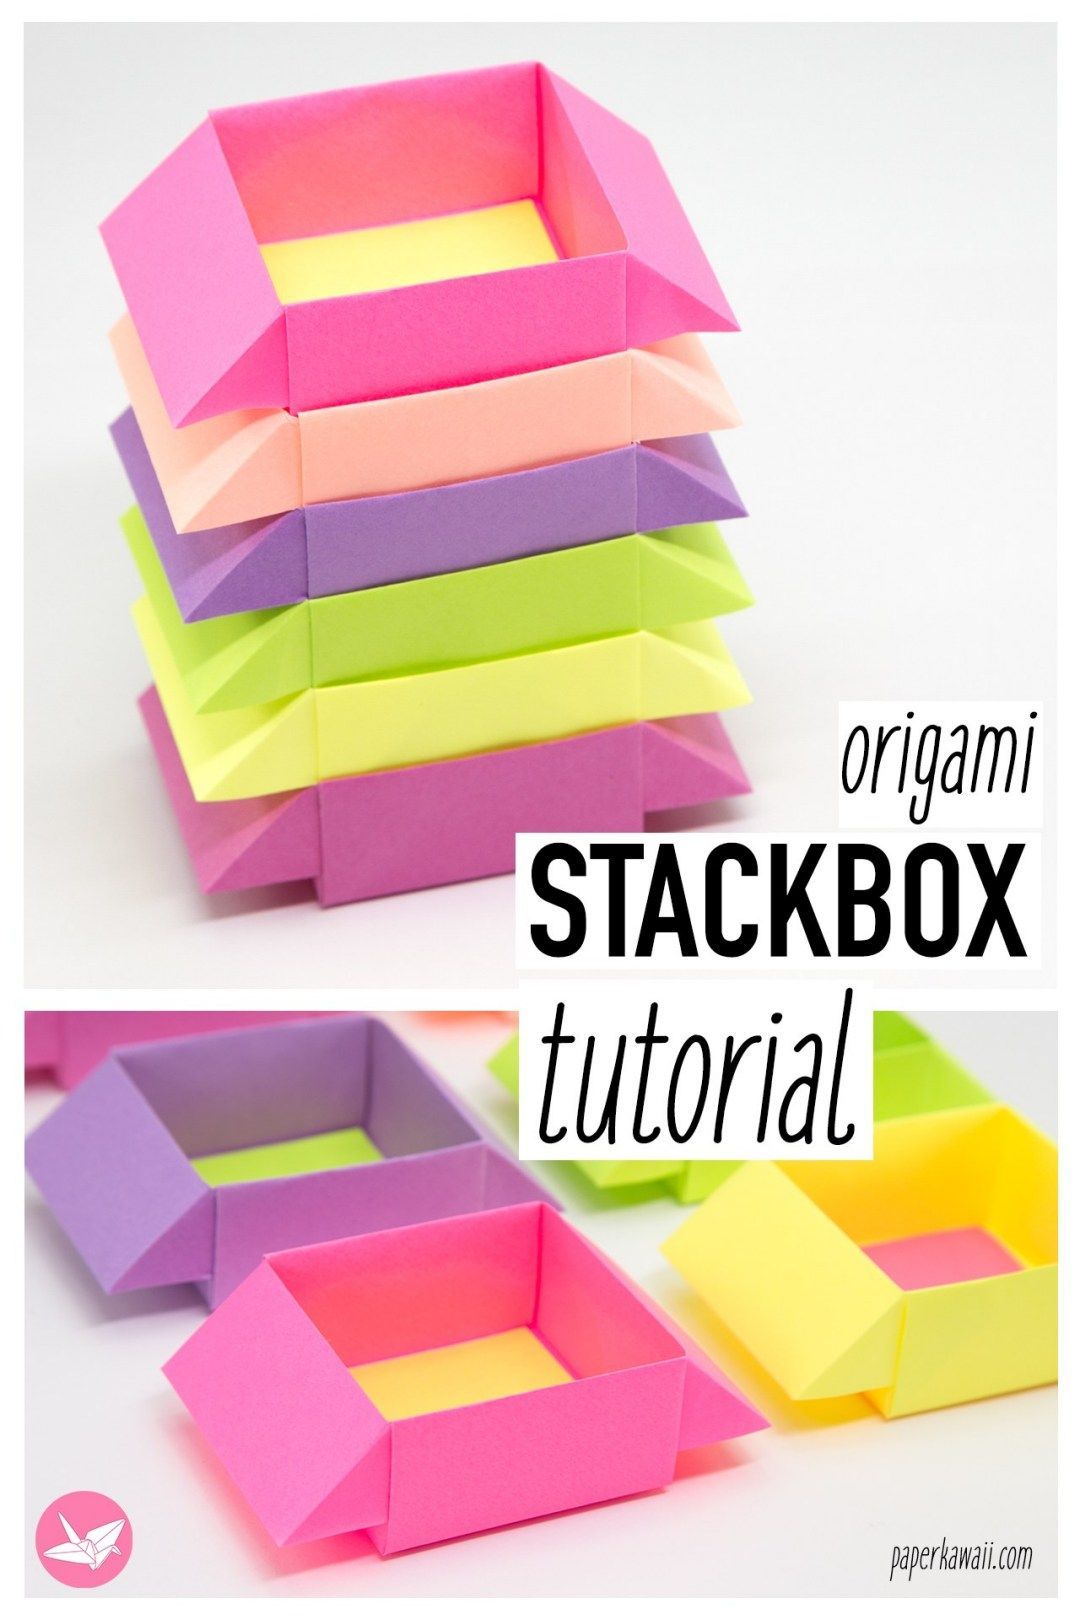 Origami Stackbox Tutorial - Stackable Boxes - Paper Kawaii - Origami Stackbox Tutorial - Stackable Boxes - Paper Kawaii -   14 diy Paper folding ideas